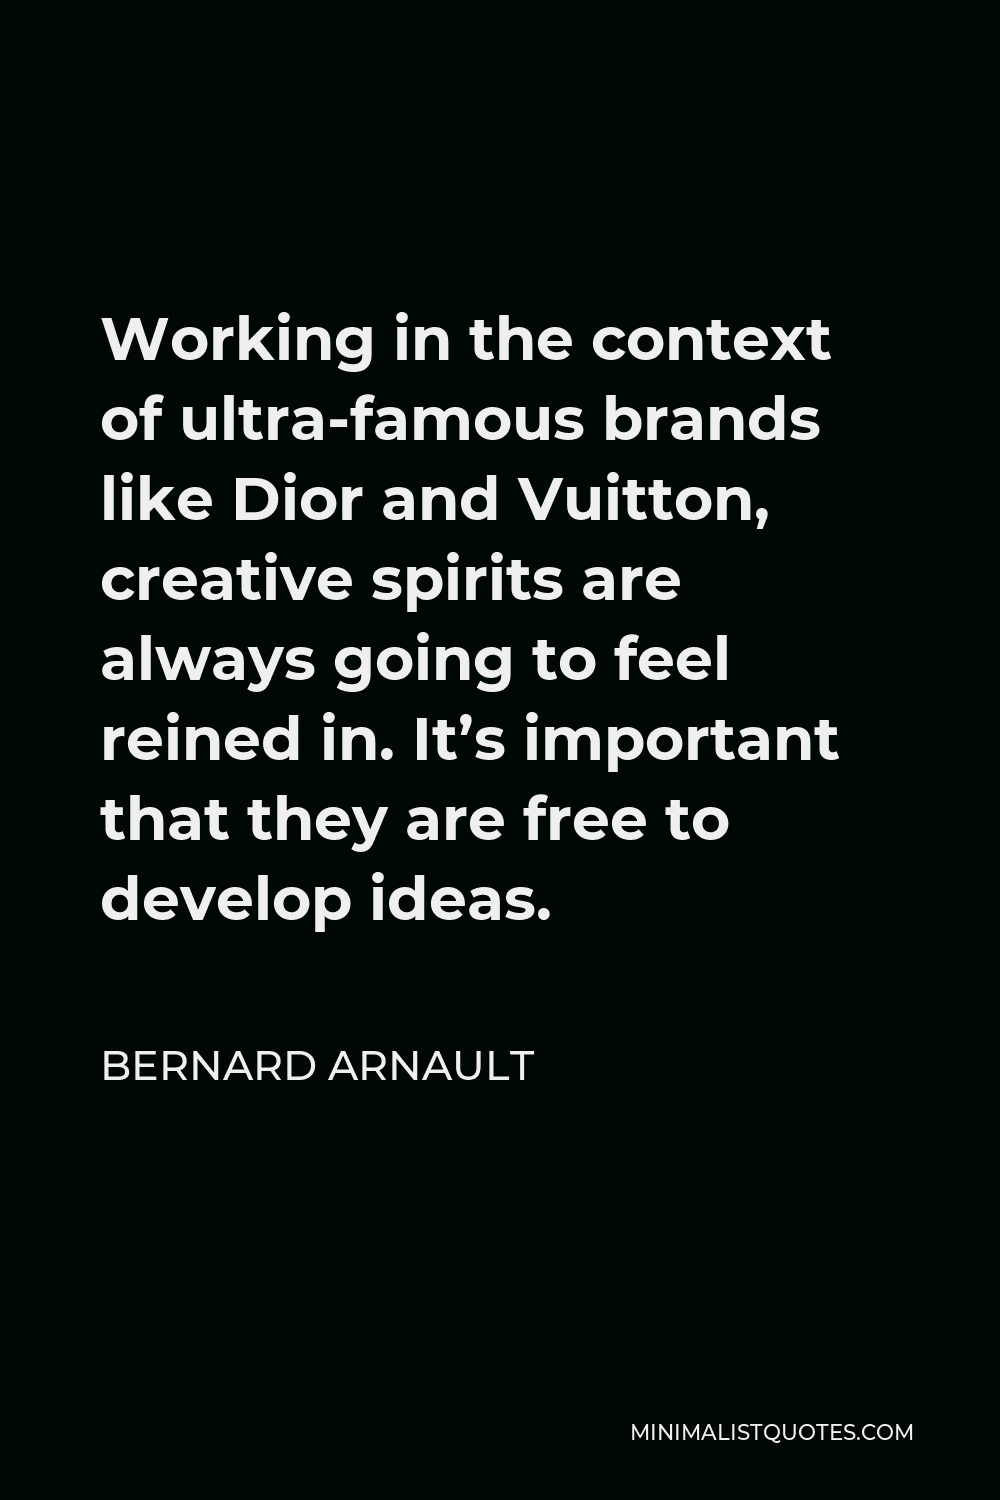 Bernard Arnault Quote - Working in the context of ultra-famous brands like Dior and Vuitton, creative spirits are always going to feel reined in. It’s important that they are free to develop ideas.